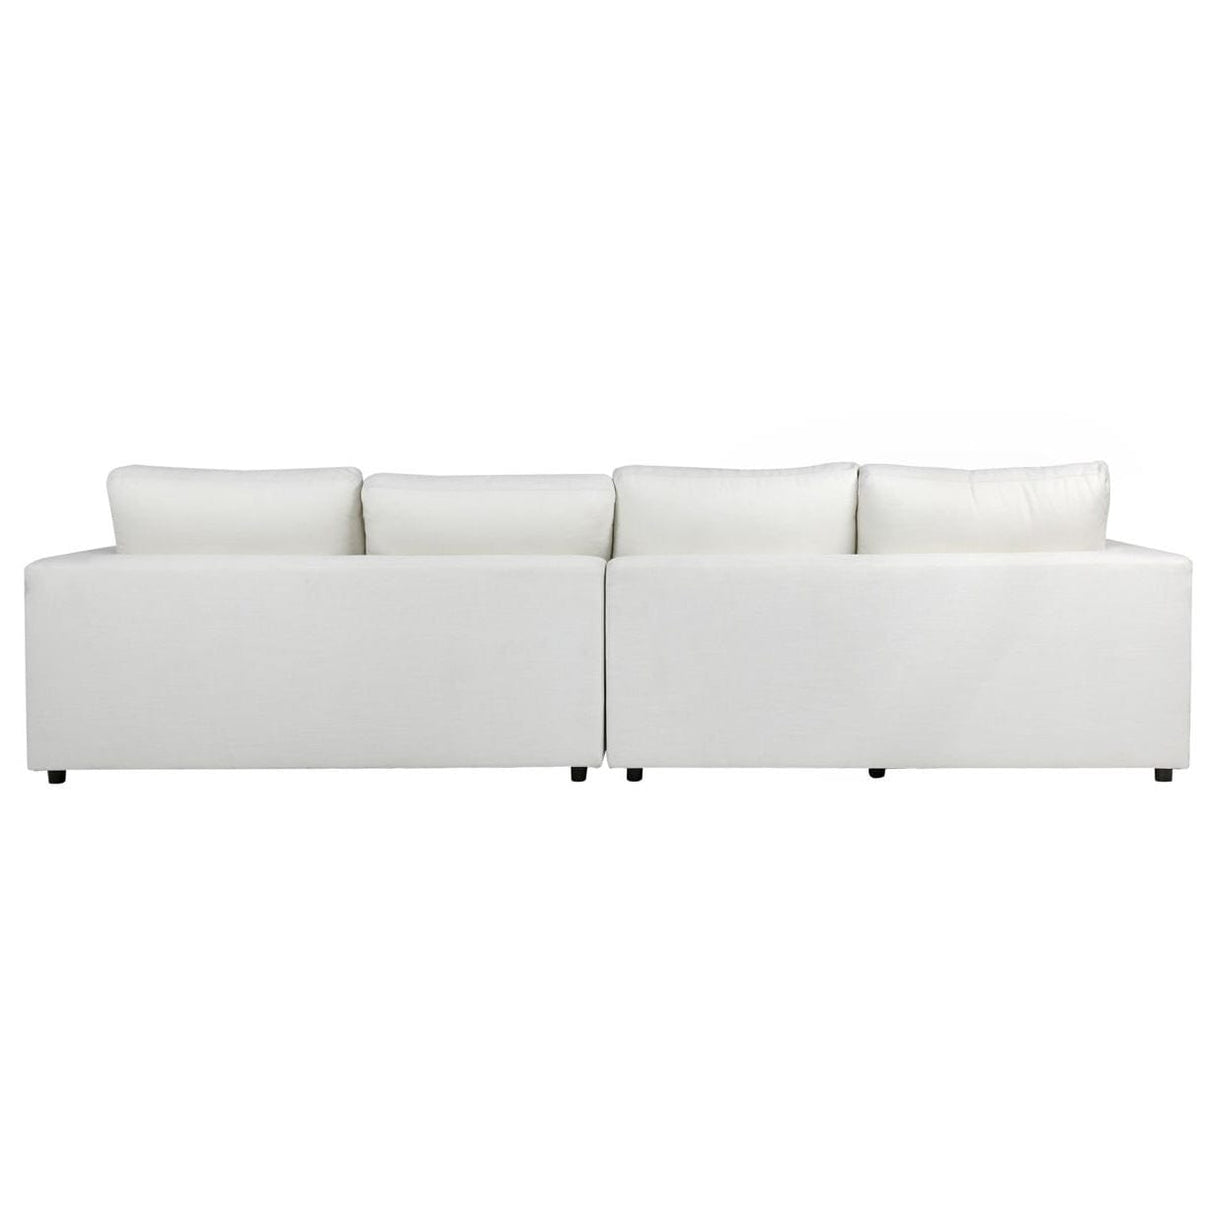 Lyndon Leigh Maxine Chaise Sectional Sectional